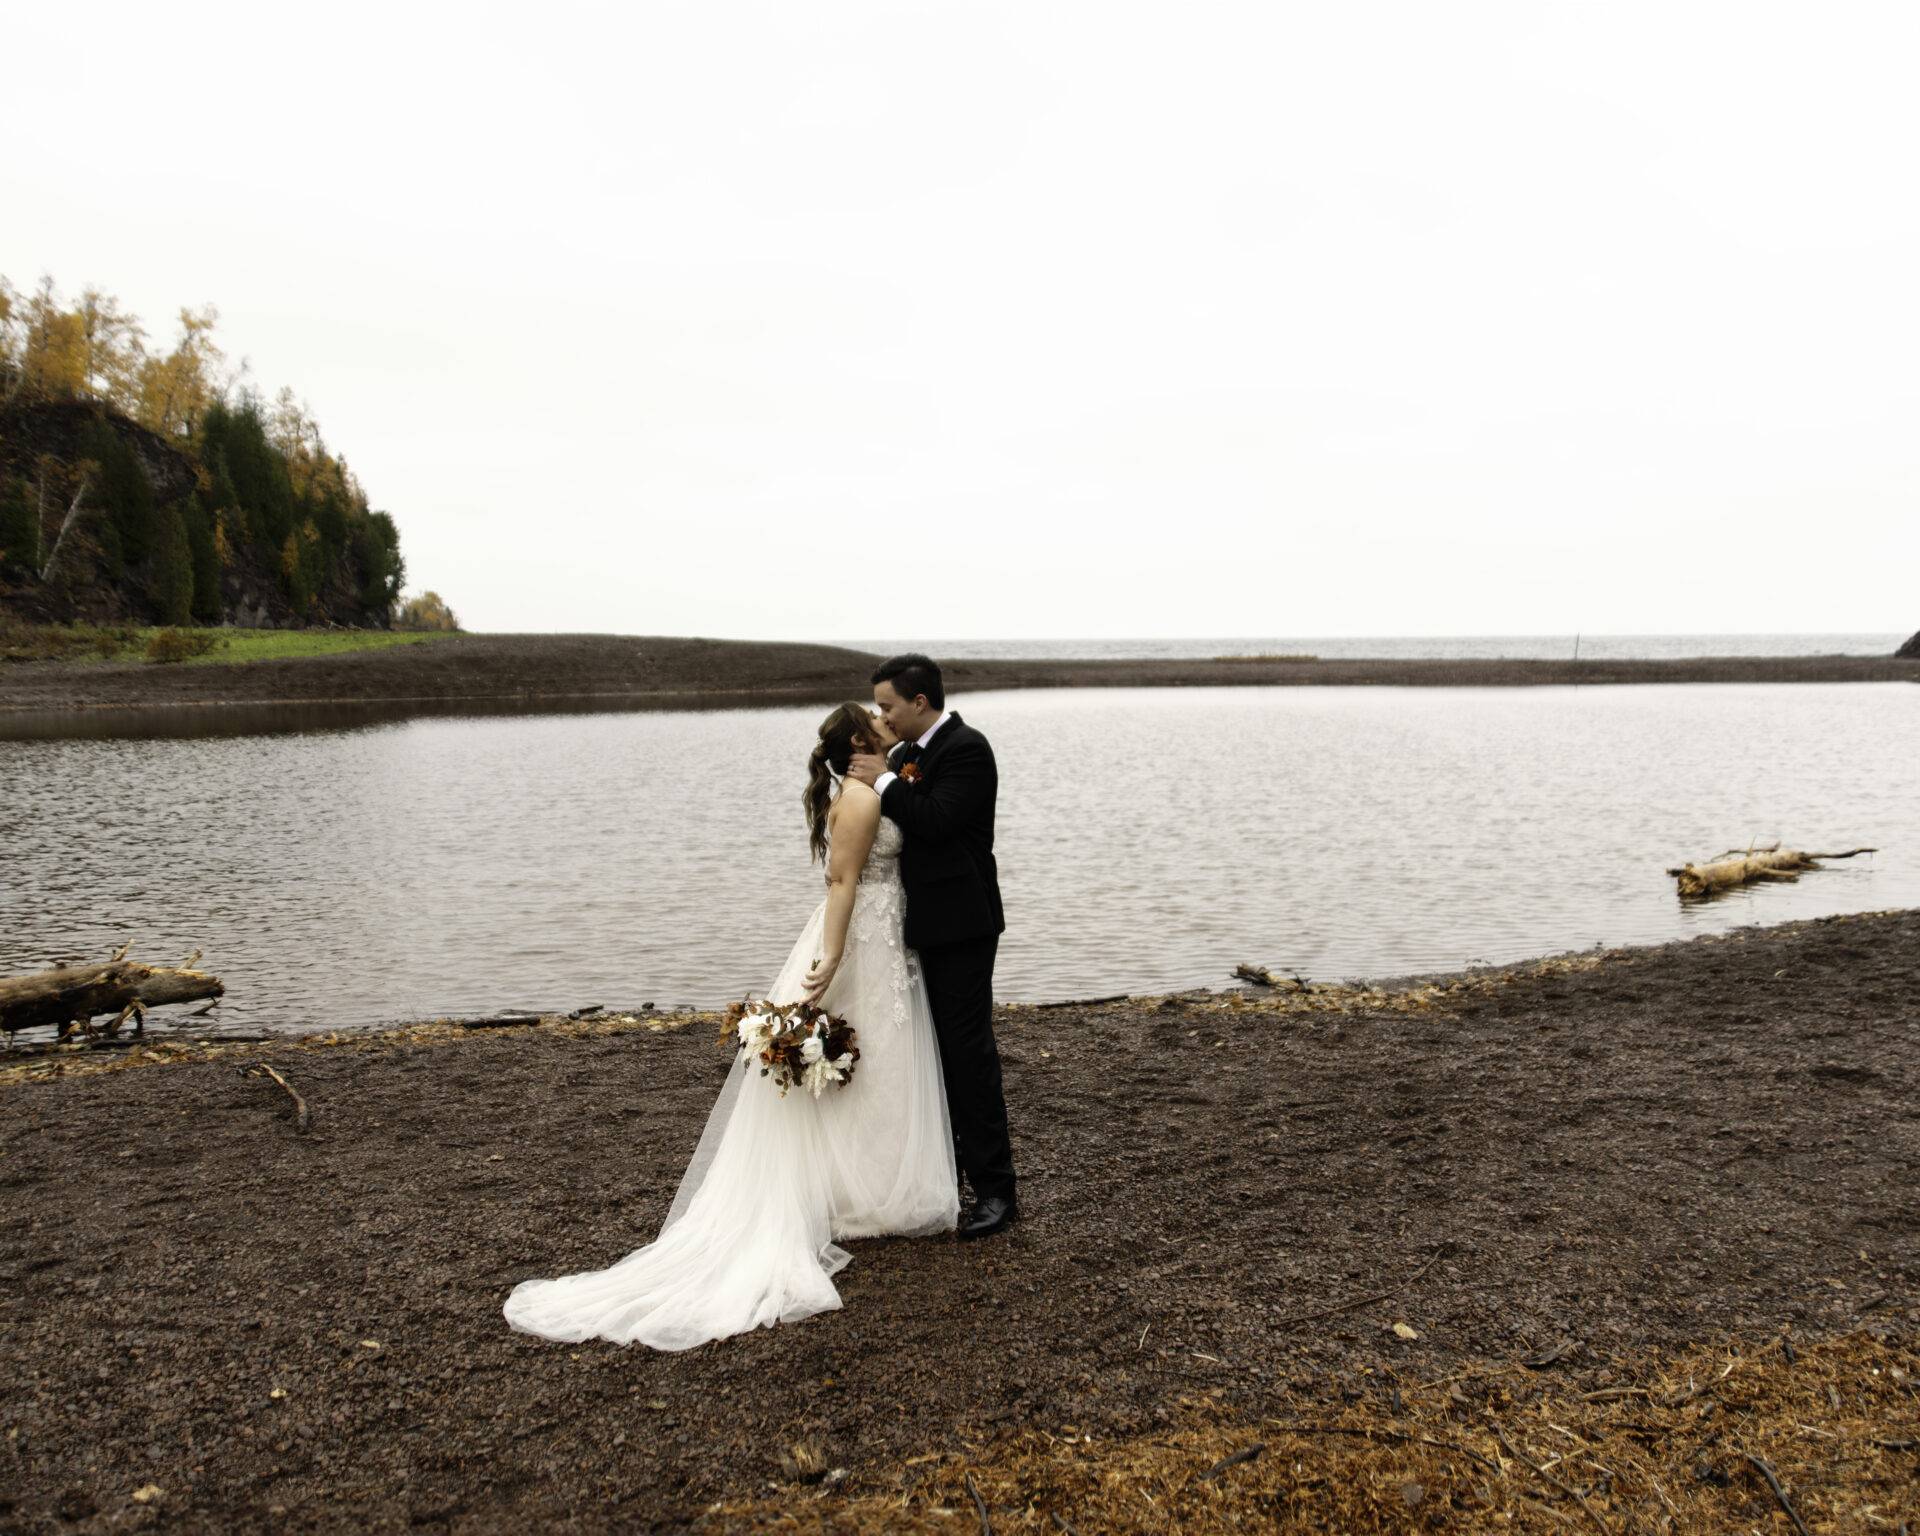 A bride and groom kissing on a sandy lakeshore, the bride holding a bouquet, with a forested hill in the background.